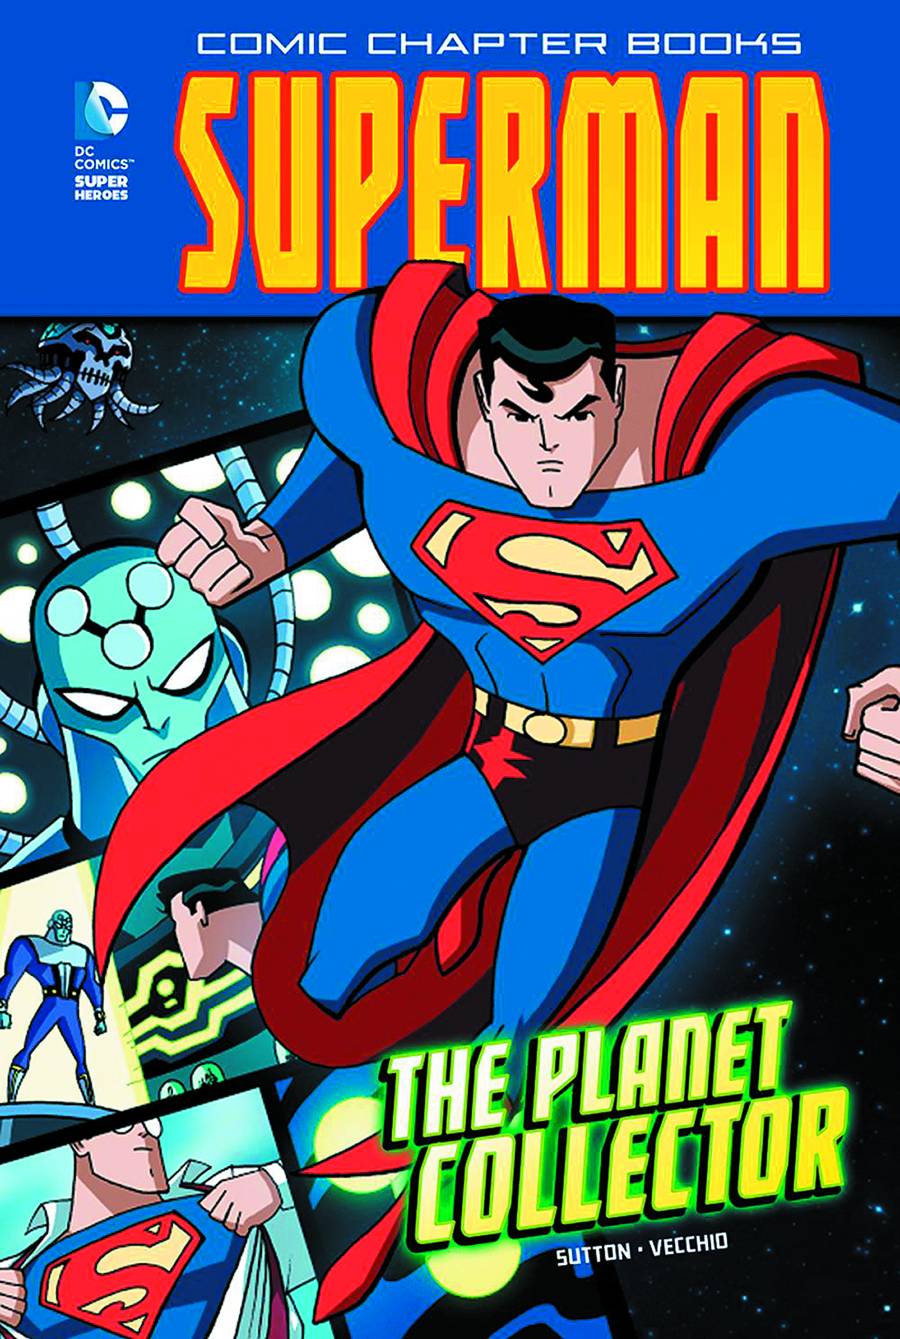 DC Super Heroes Superman Young Reader Graphic Novel #22 Planet Collector